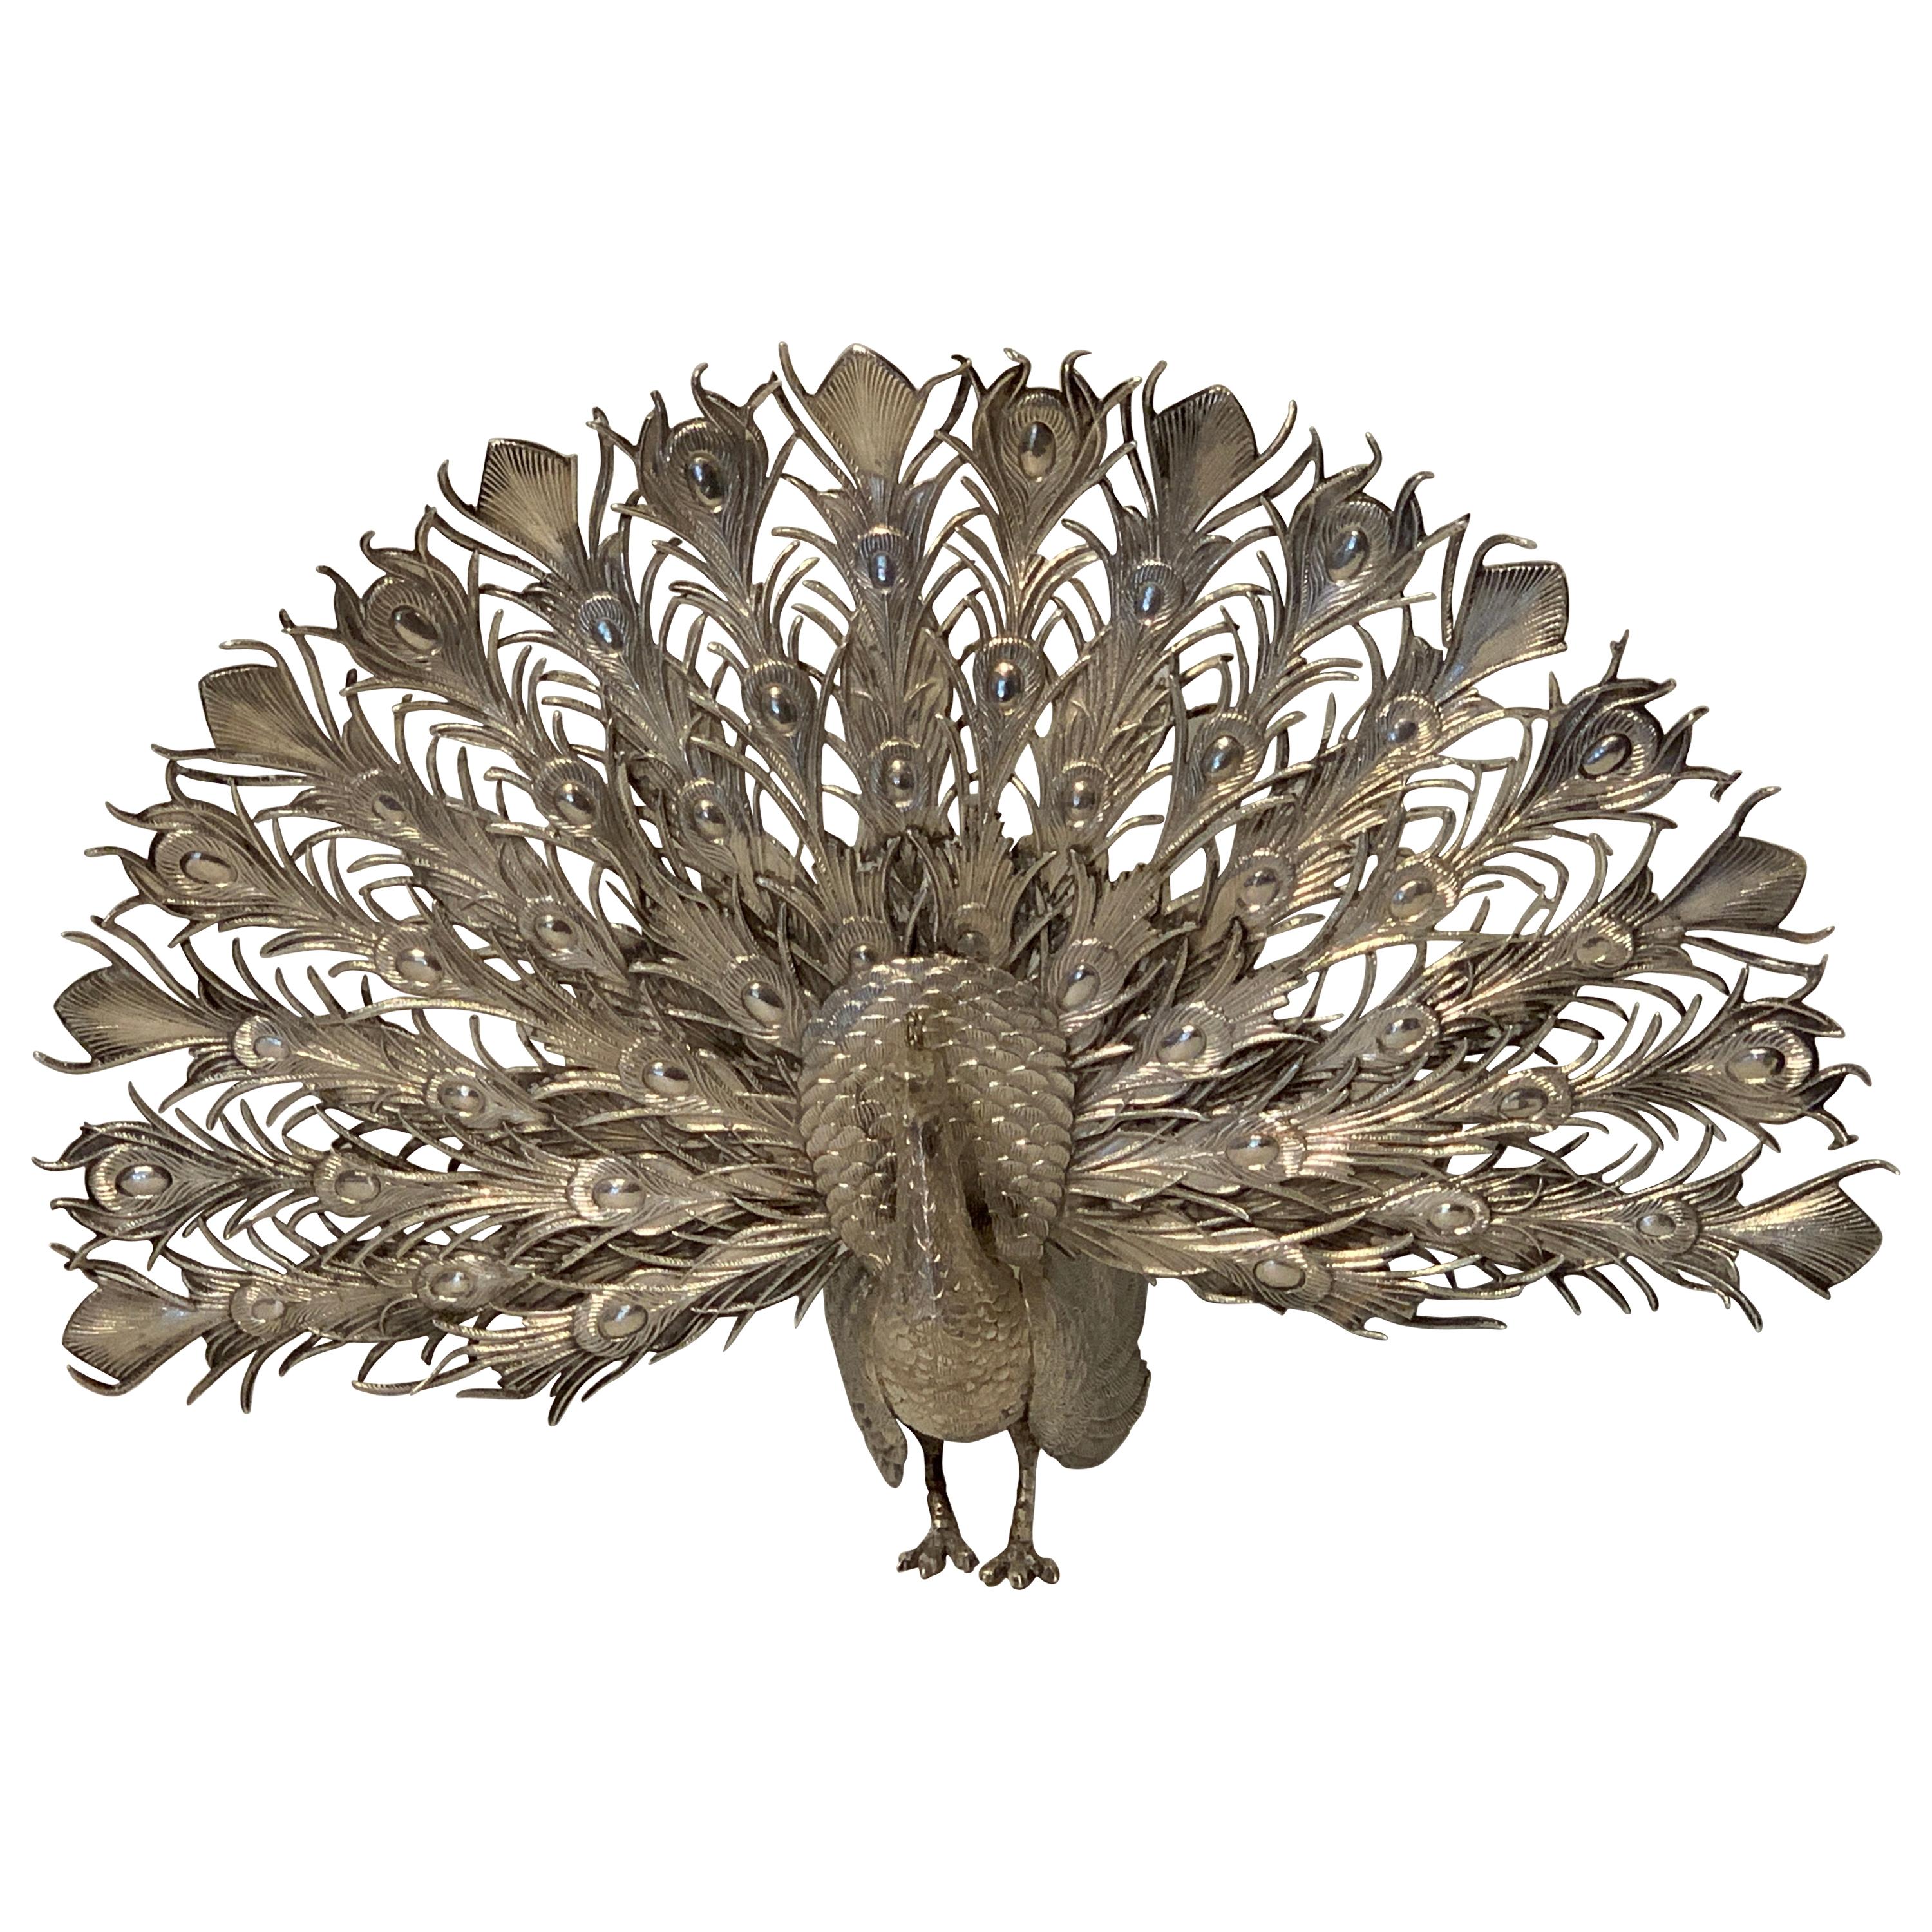 Continental Silver Model of a Peacock